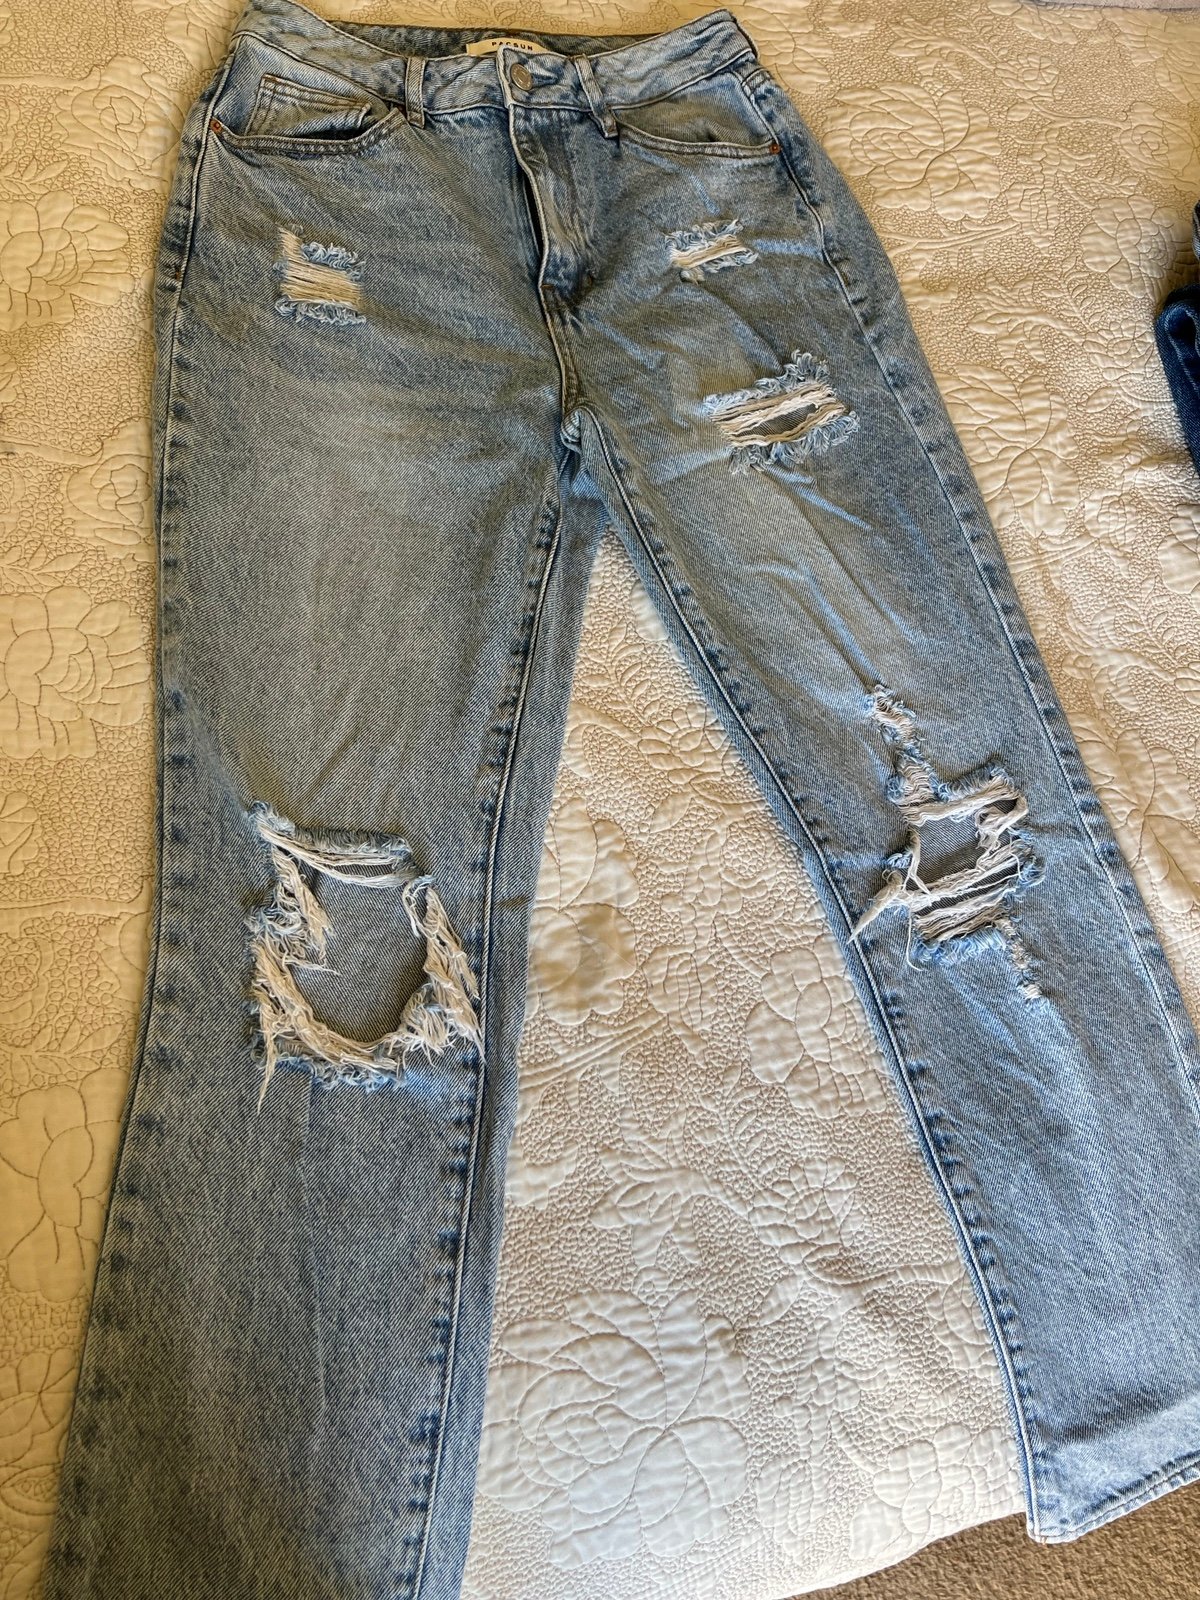 Special offer  Pacsun mom jeans 26 gGIbmraBV Discount